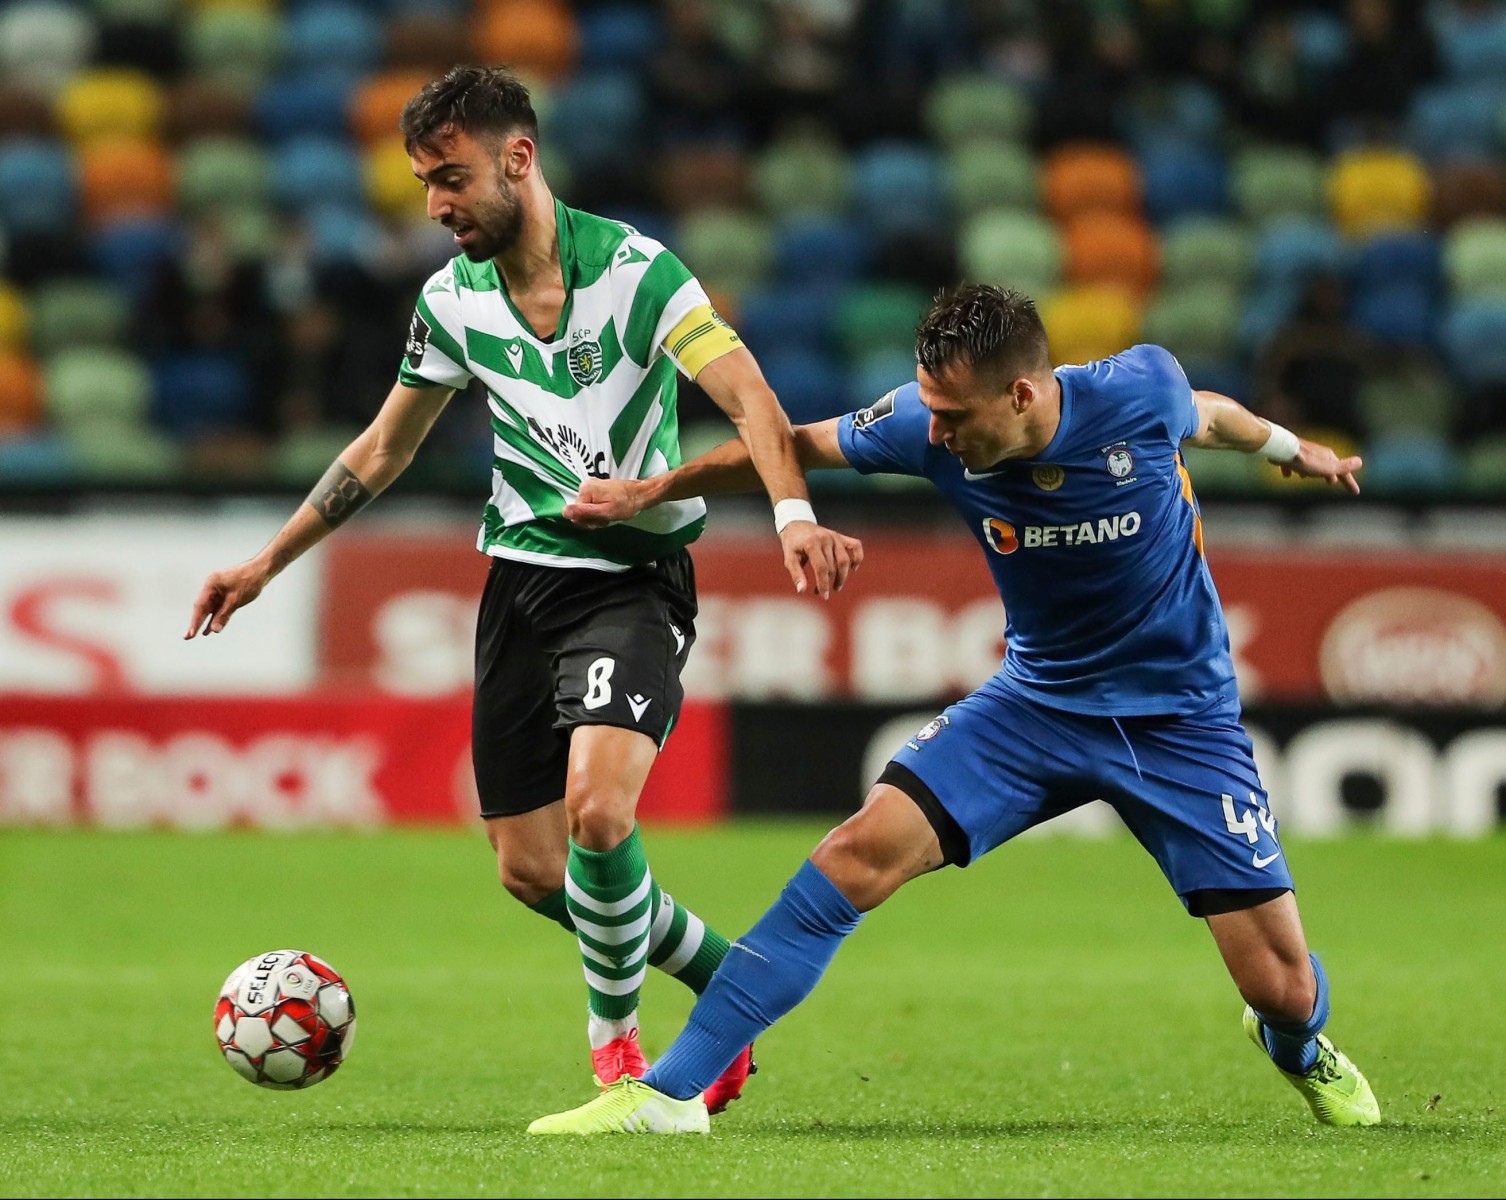 , Man Utd handed transfer boost in race for Bruno Fernandes as Sporting Lisbon boss cannot confirm whether he will stay